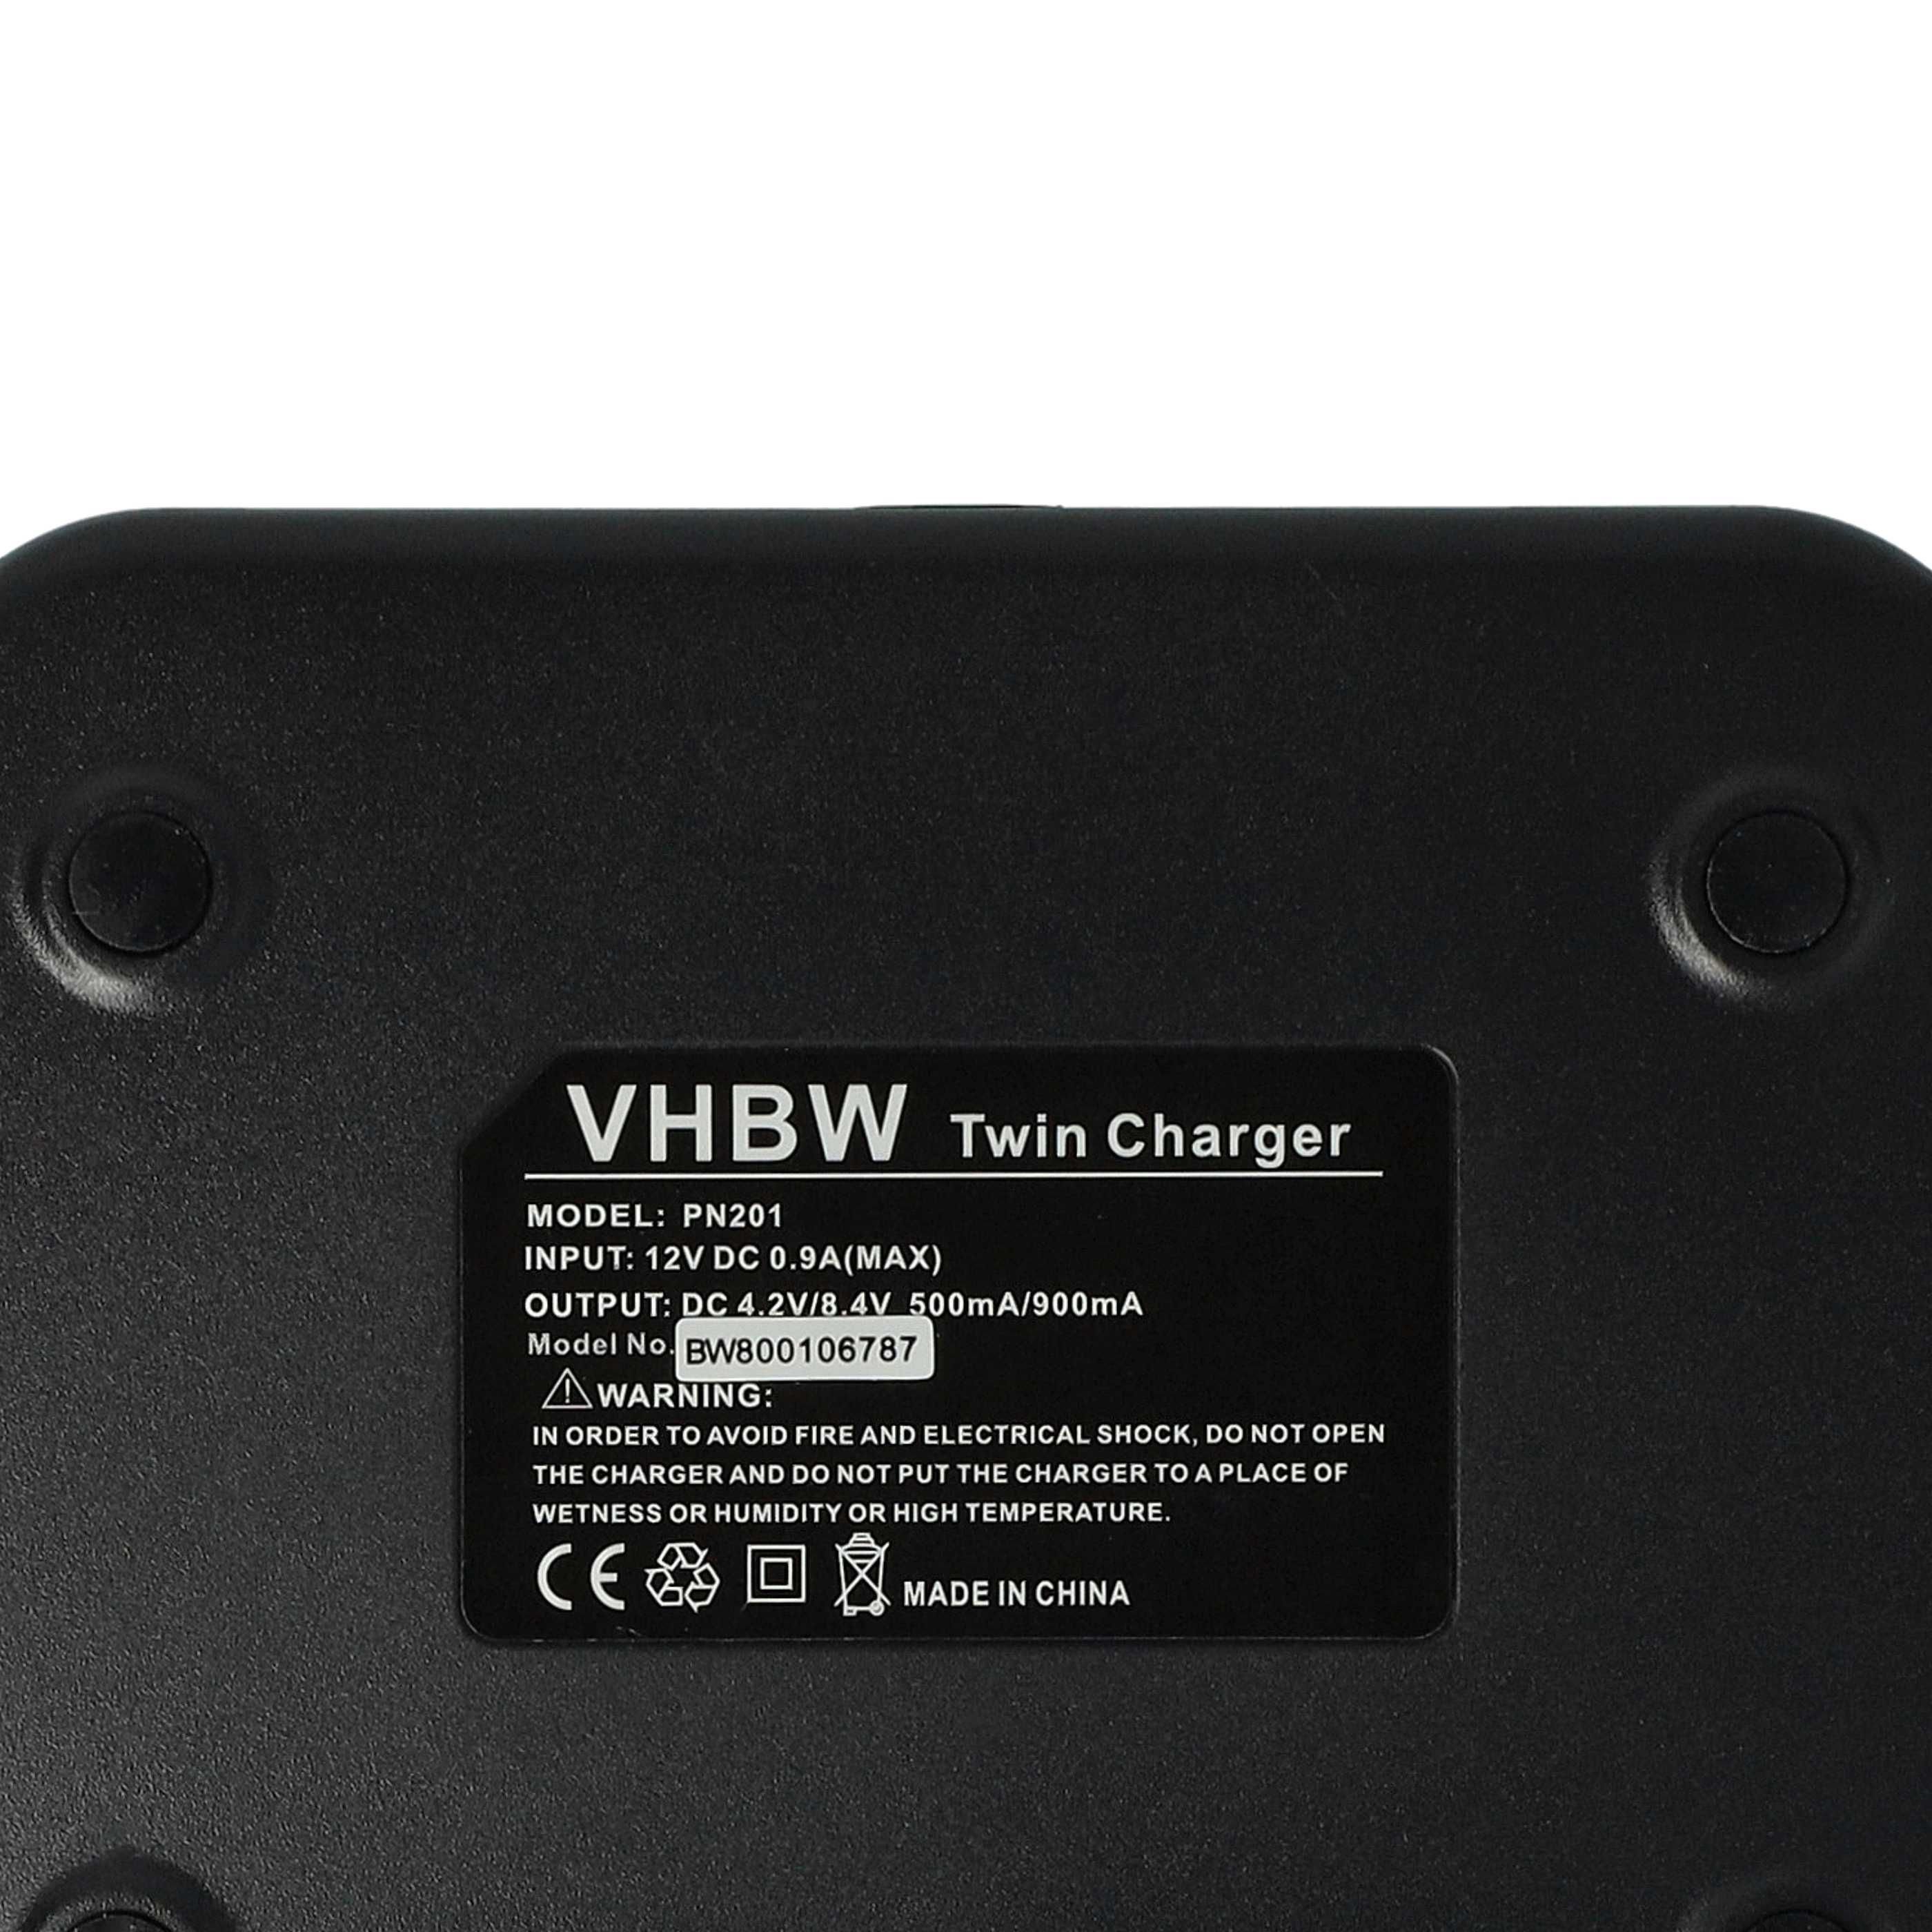 Battery Charger suitable for GE Digital Camera - 0.5 / 0.9 A, 4.2/8.4 V